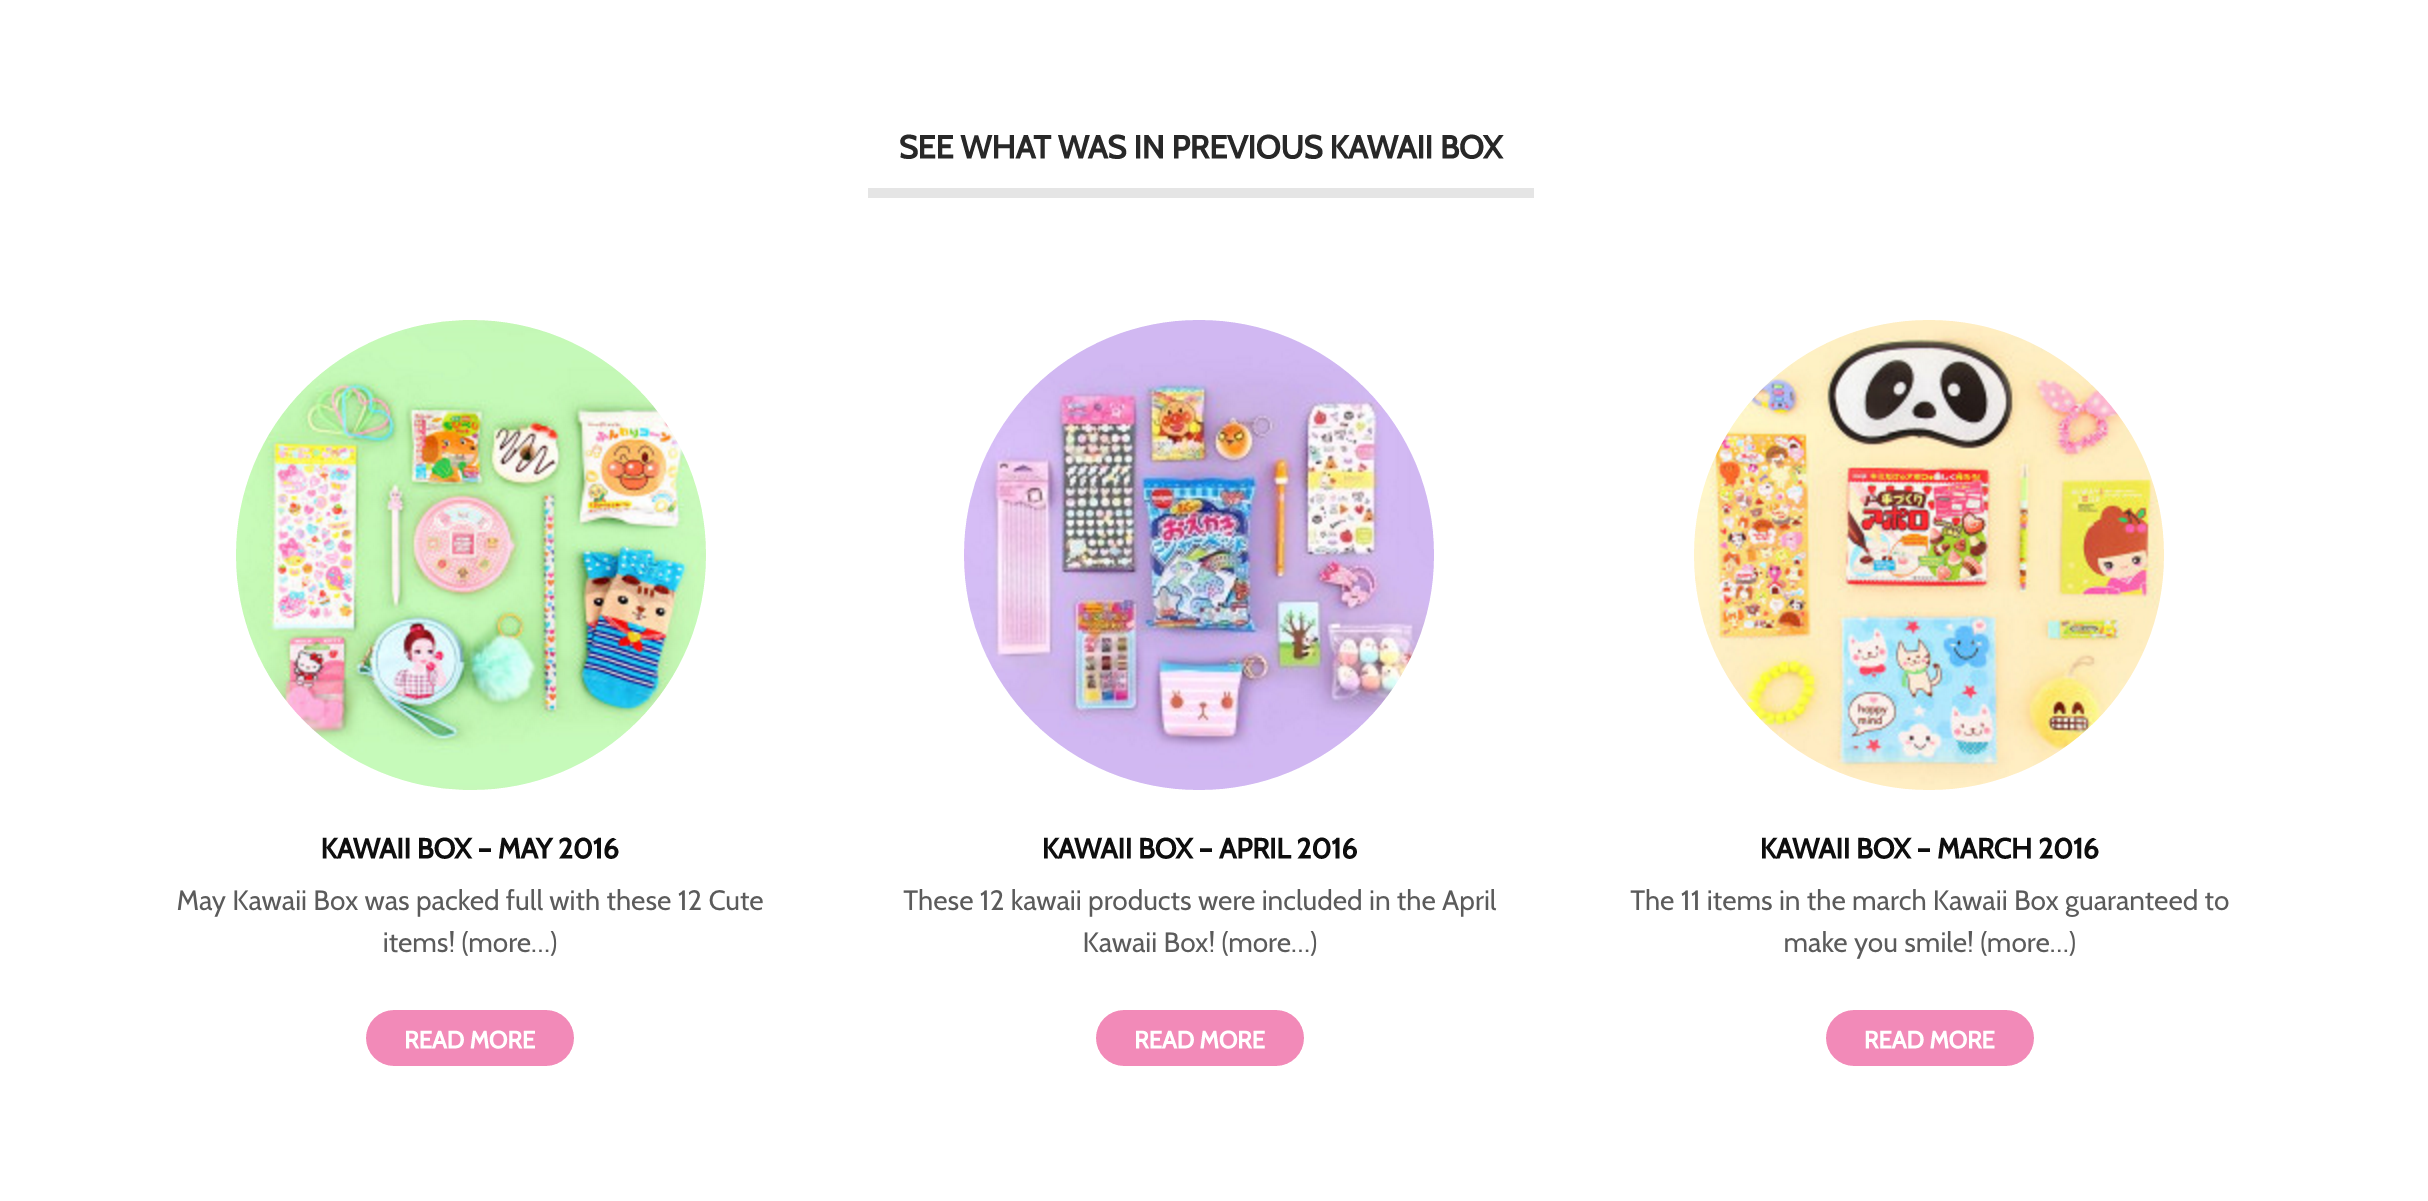 Get a peek into past boxes before signing up -- and know exactly what's in store for you. Good form, Kawaii Box.